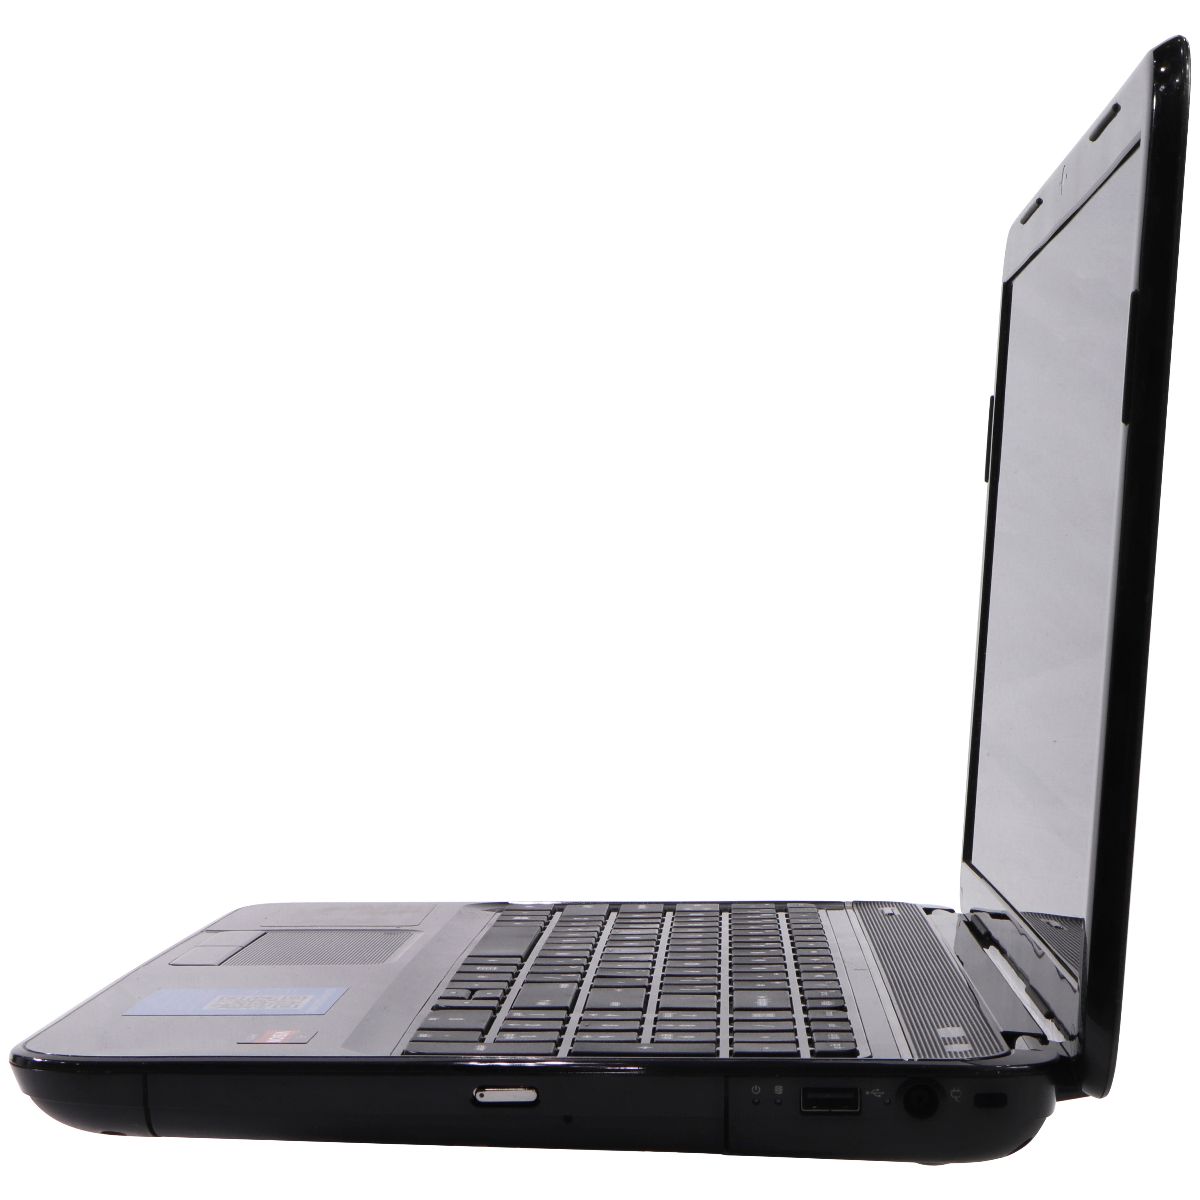 HP Pavilion G6 Notebook (15.6-in) (g6-2235us) AMD A64400M 4GB RAM/750 GB HDD Laptops - PC Laptops & Netbooks HP    - Simple Cell Bulk Wholesale Pricing - USA Seller